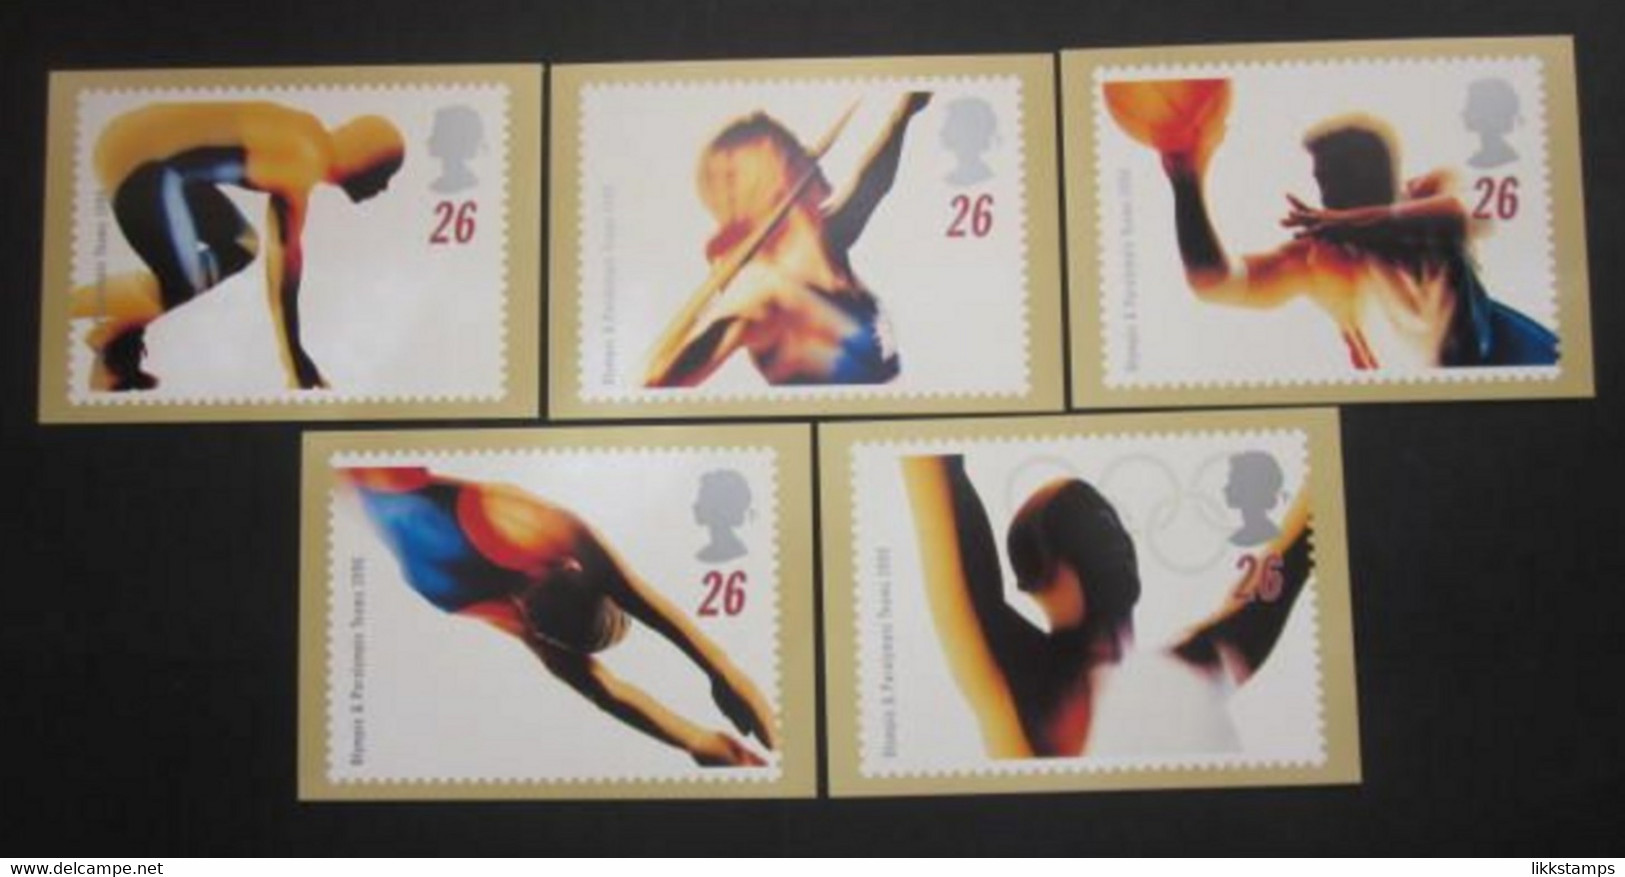 1996 THE OLYMPIC AND PARALYMPIC GAMES P.H.Q. CARDS UNUSED, ISSUE No. 180 (B) #01050 - PHQ Karten